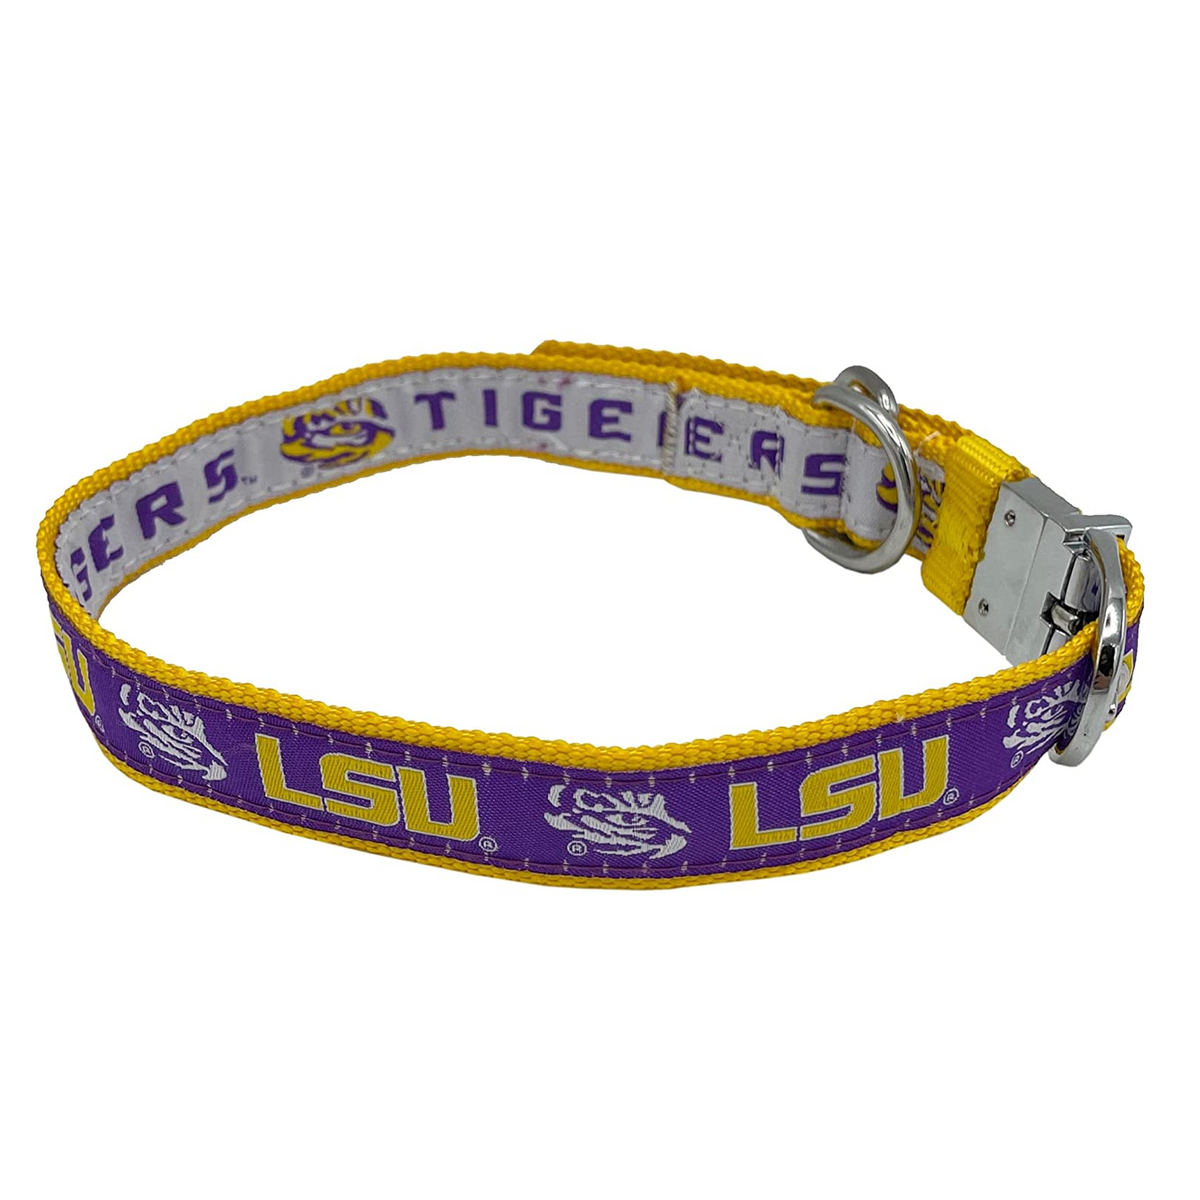 LSU Tigers Reversible Dog Collar - 3 Red Rovers